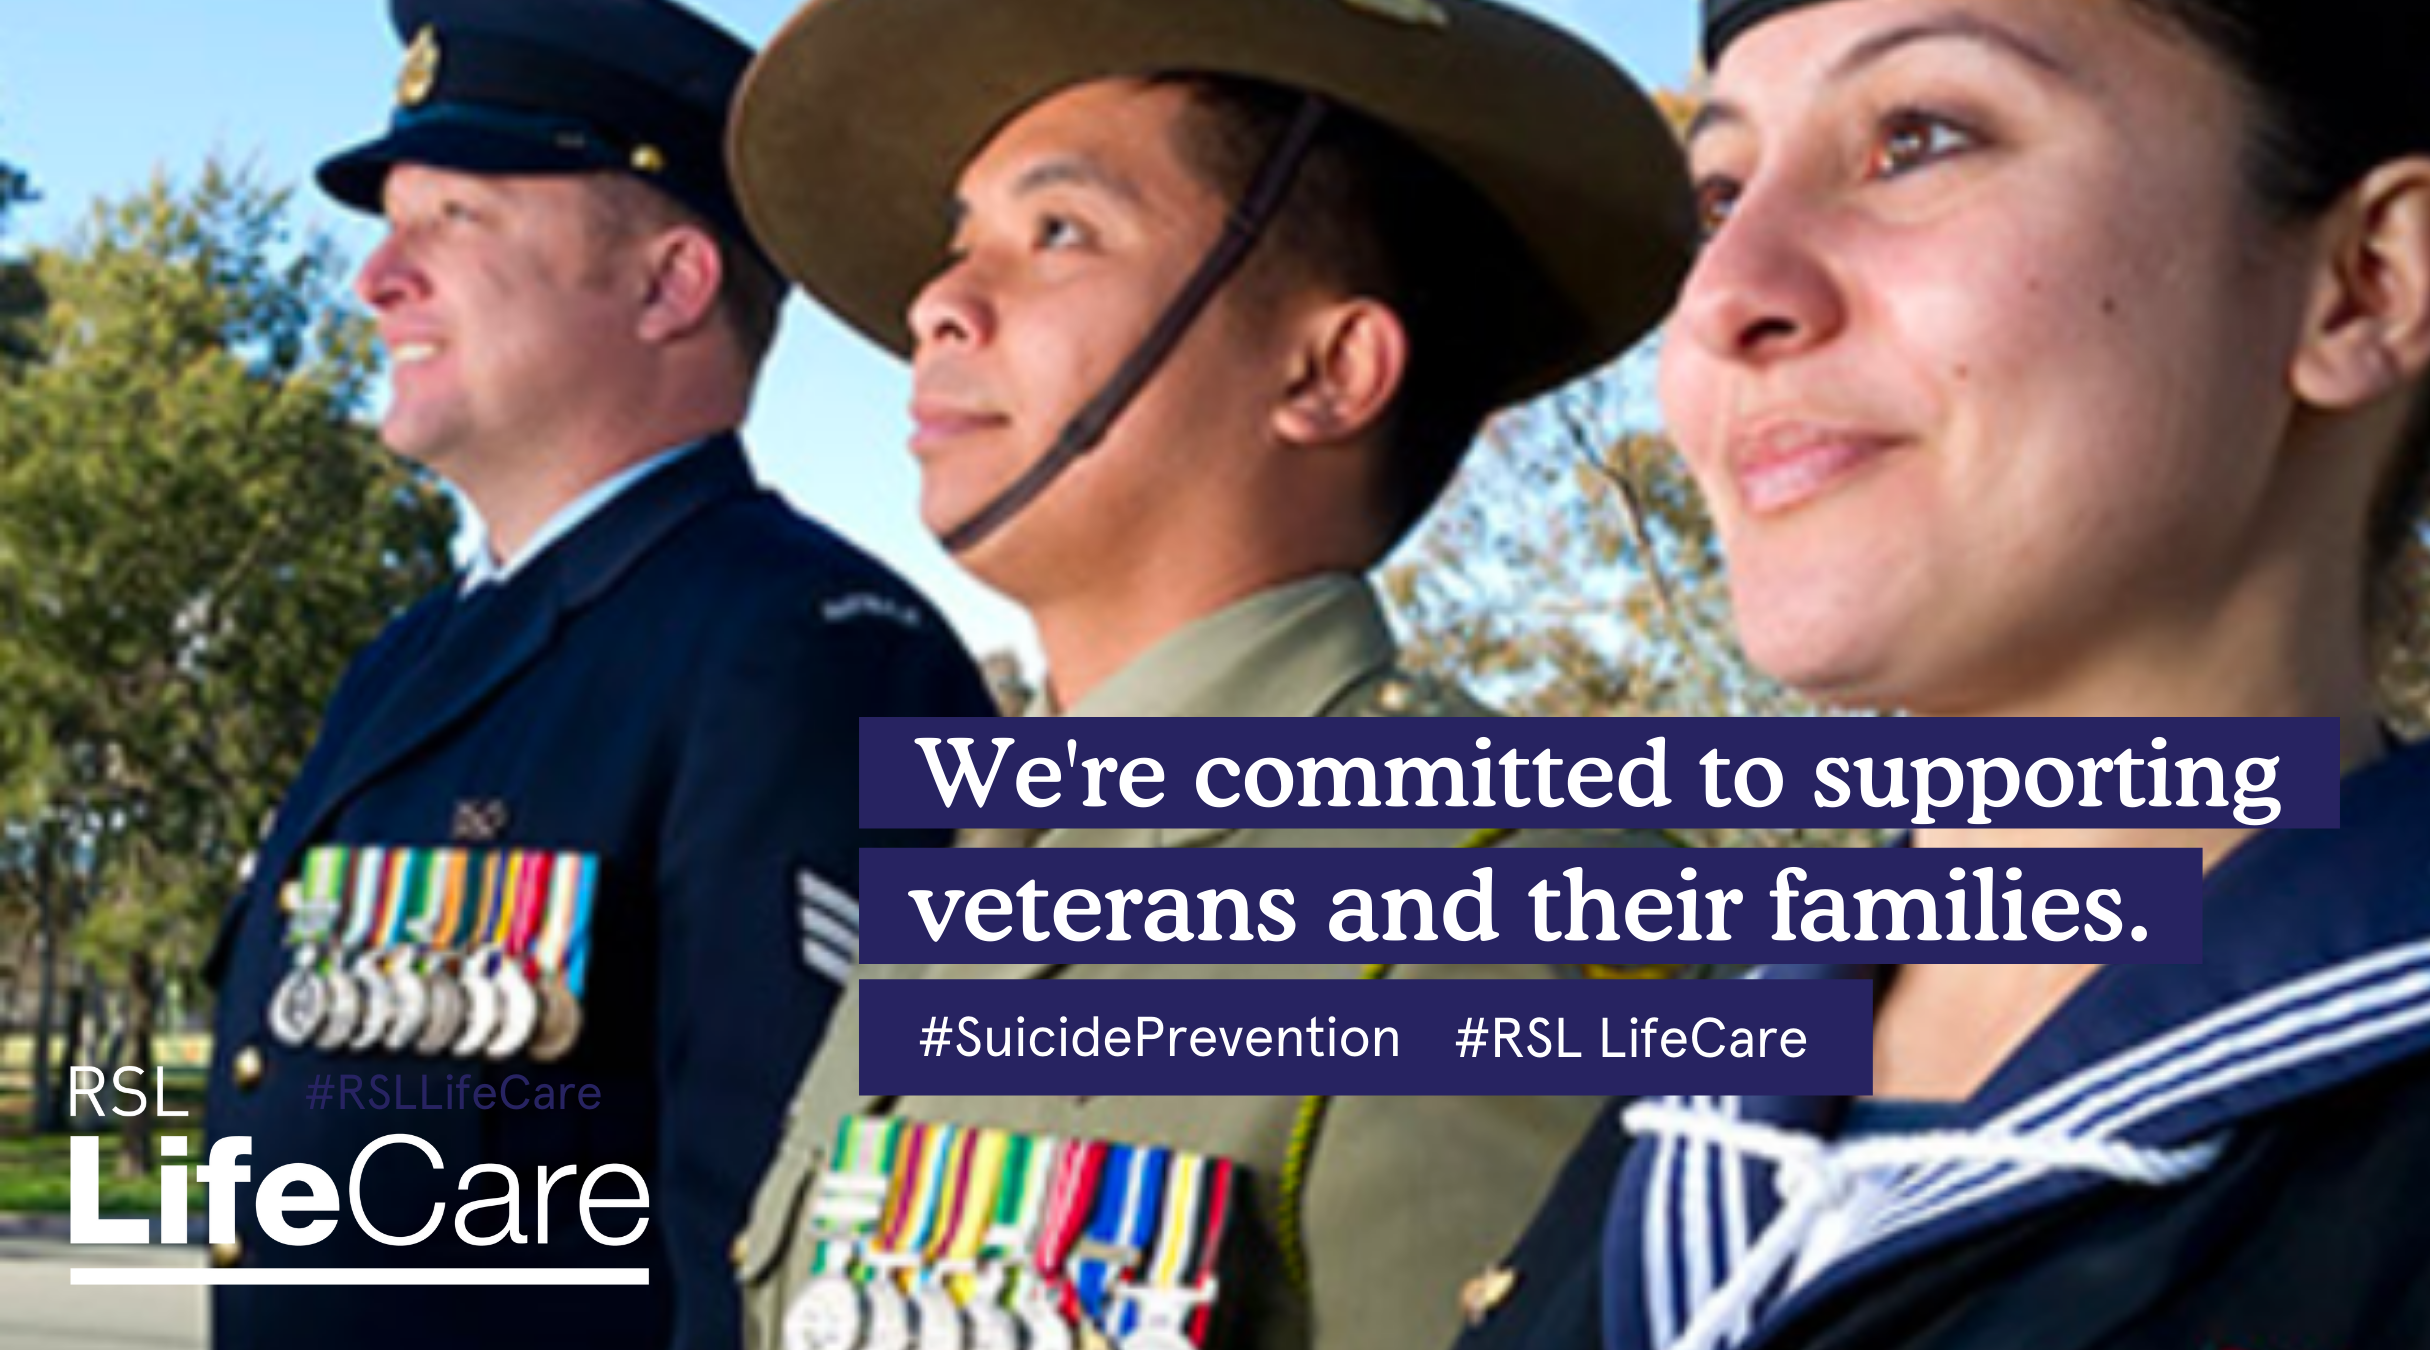 Suicide-Prevention | RSL LifeCare - provide care and service to war veterans, retirement villages and accommodation, aged care services and assisted living